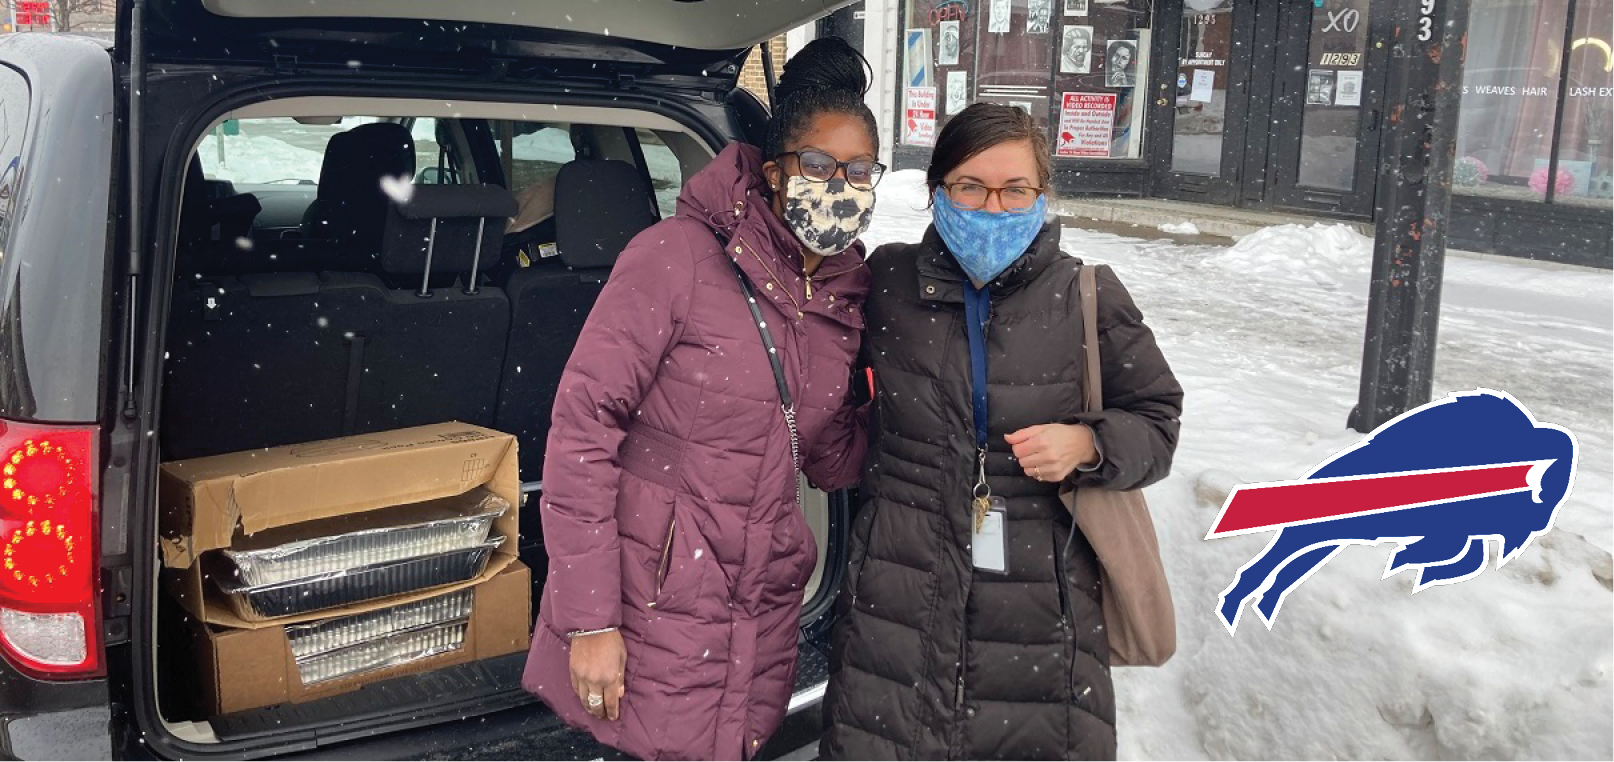 Two women wearing masks stand in the snow outside of a car's open trunk